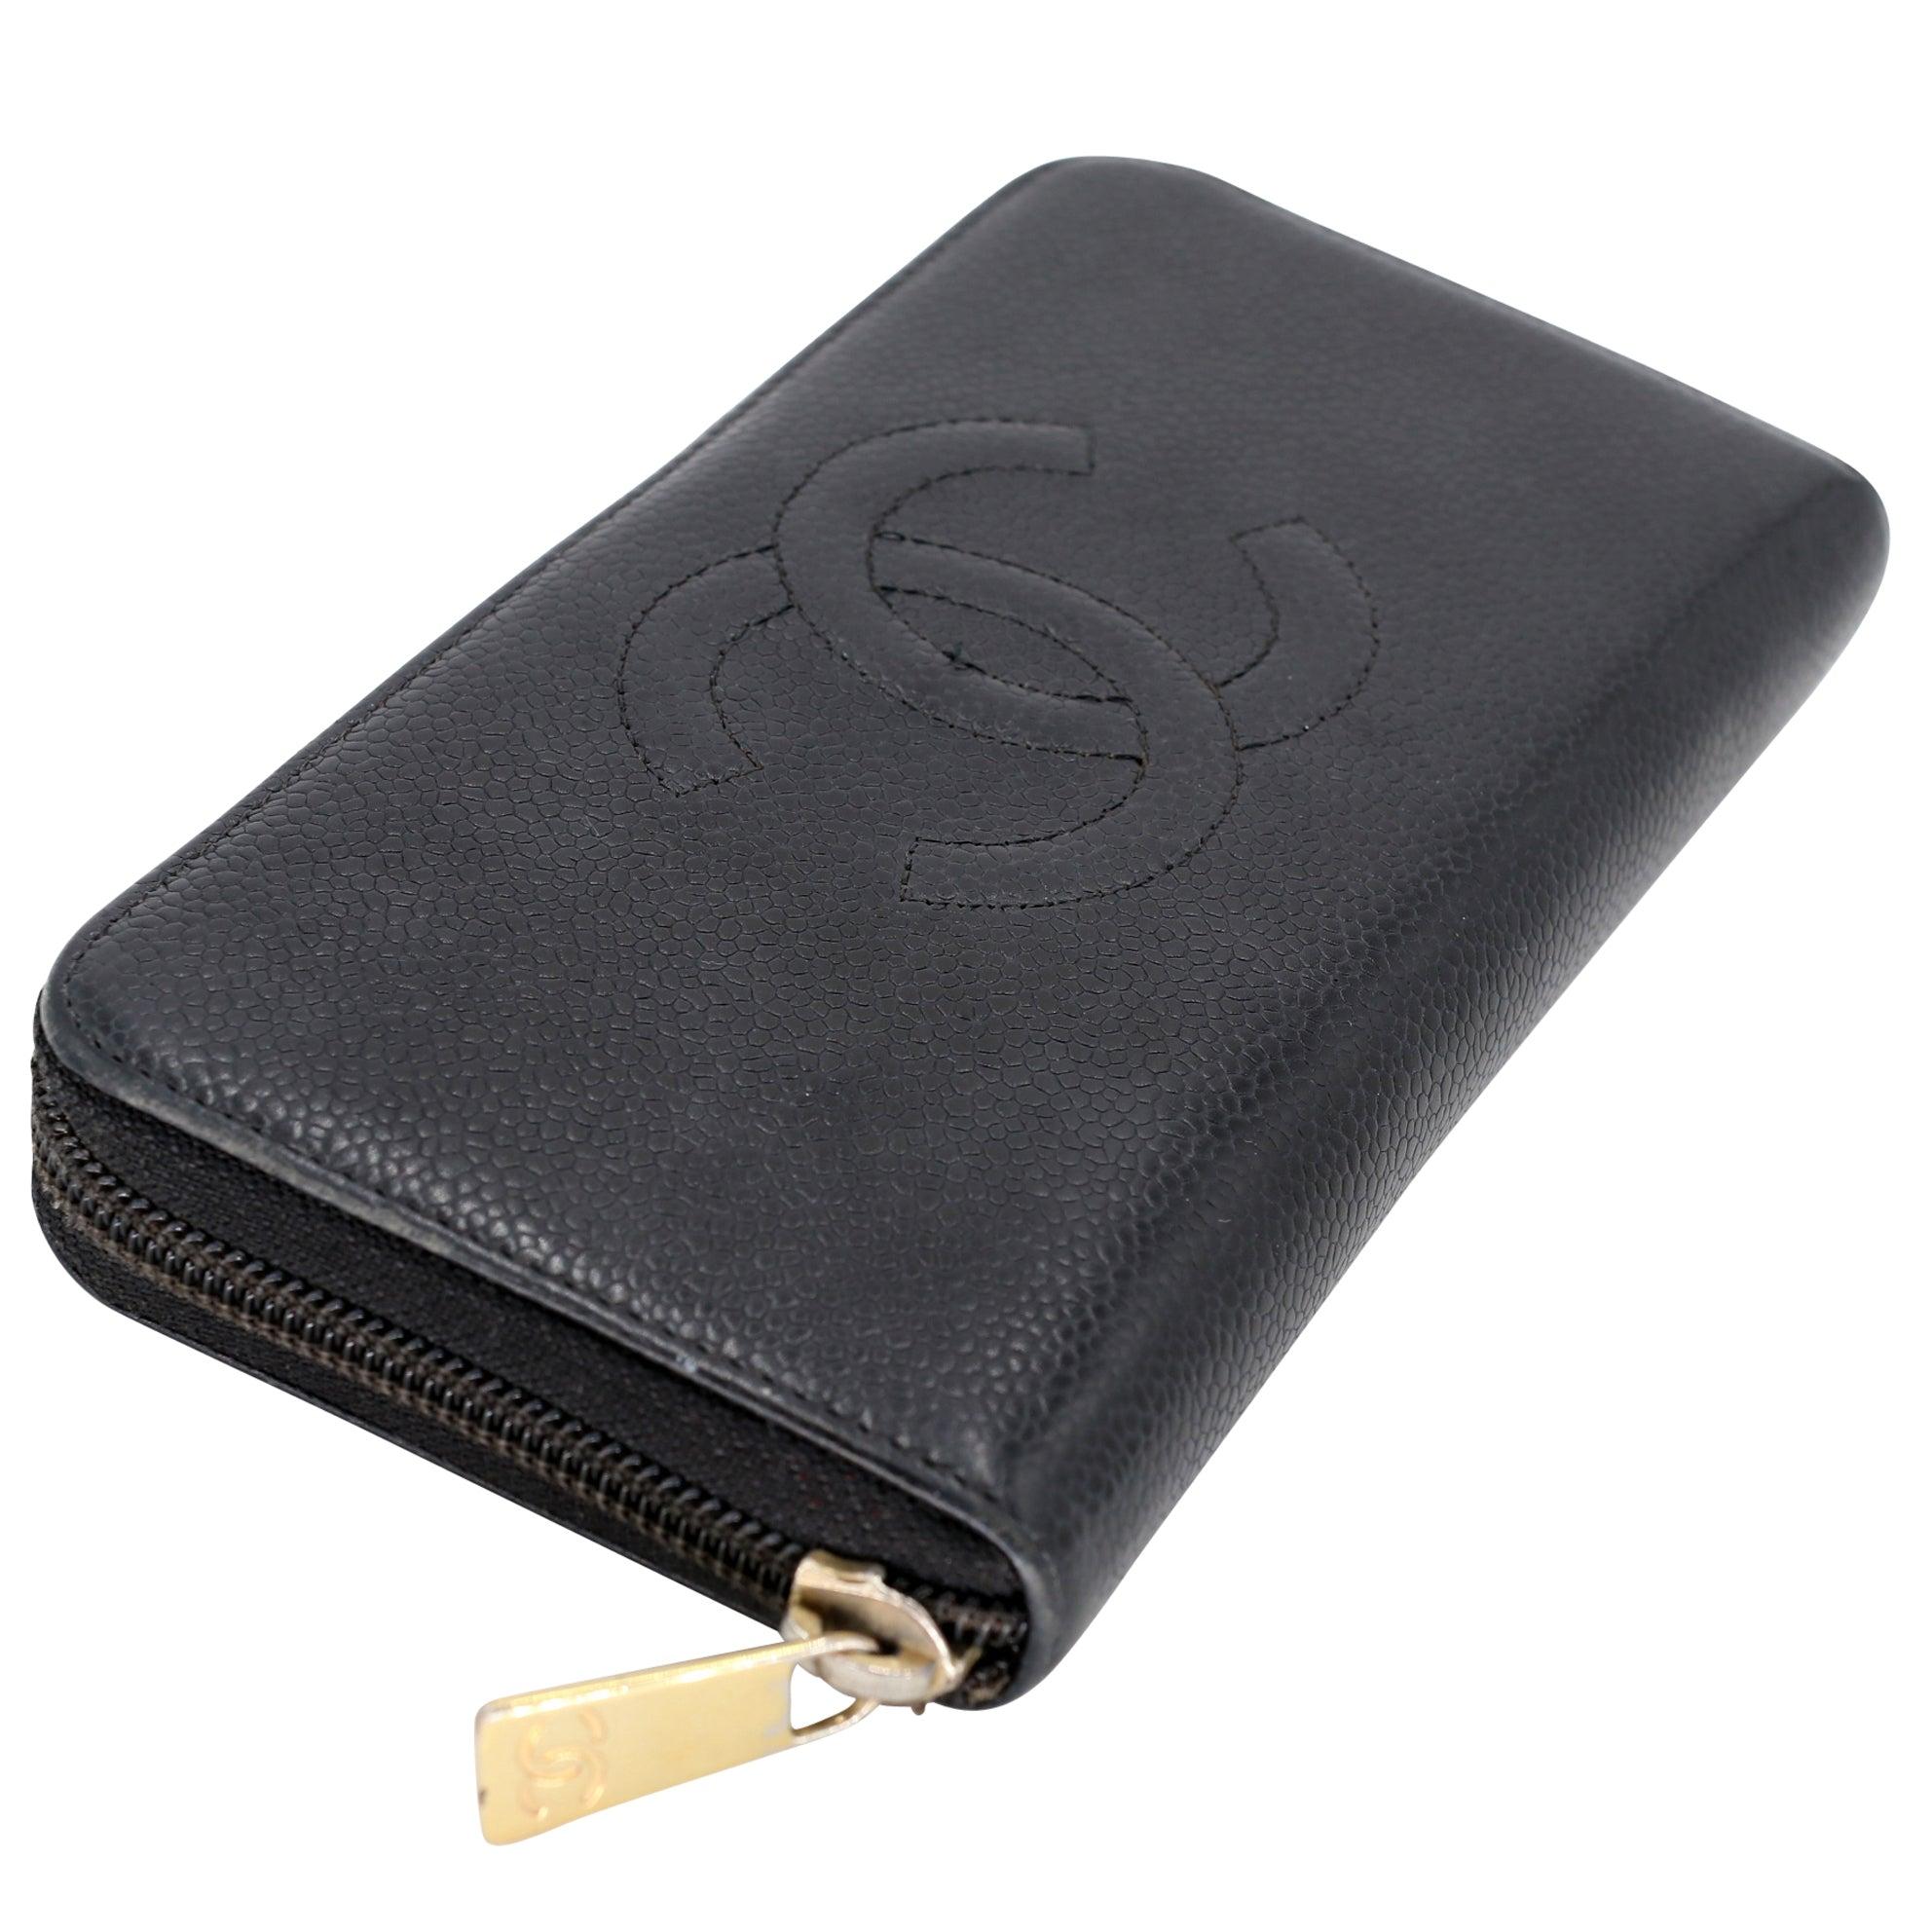 Chanel Caviar Leather Big CC Zip Monogram Wallet CC-W1020P-A004 In Good Condition For Sale In Downey, CA